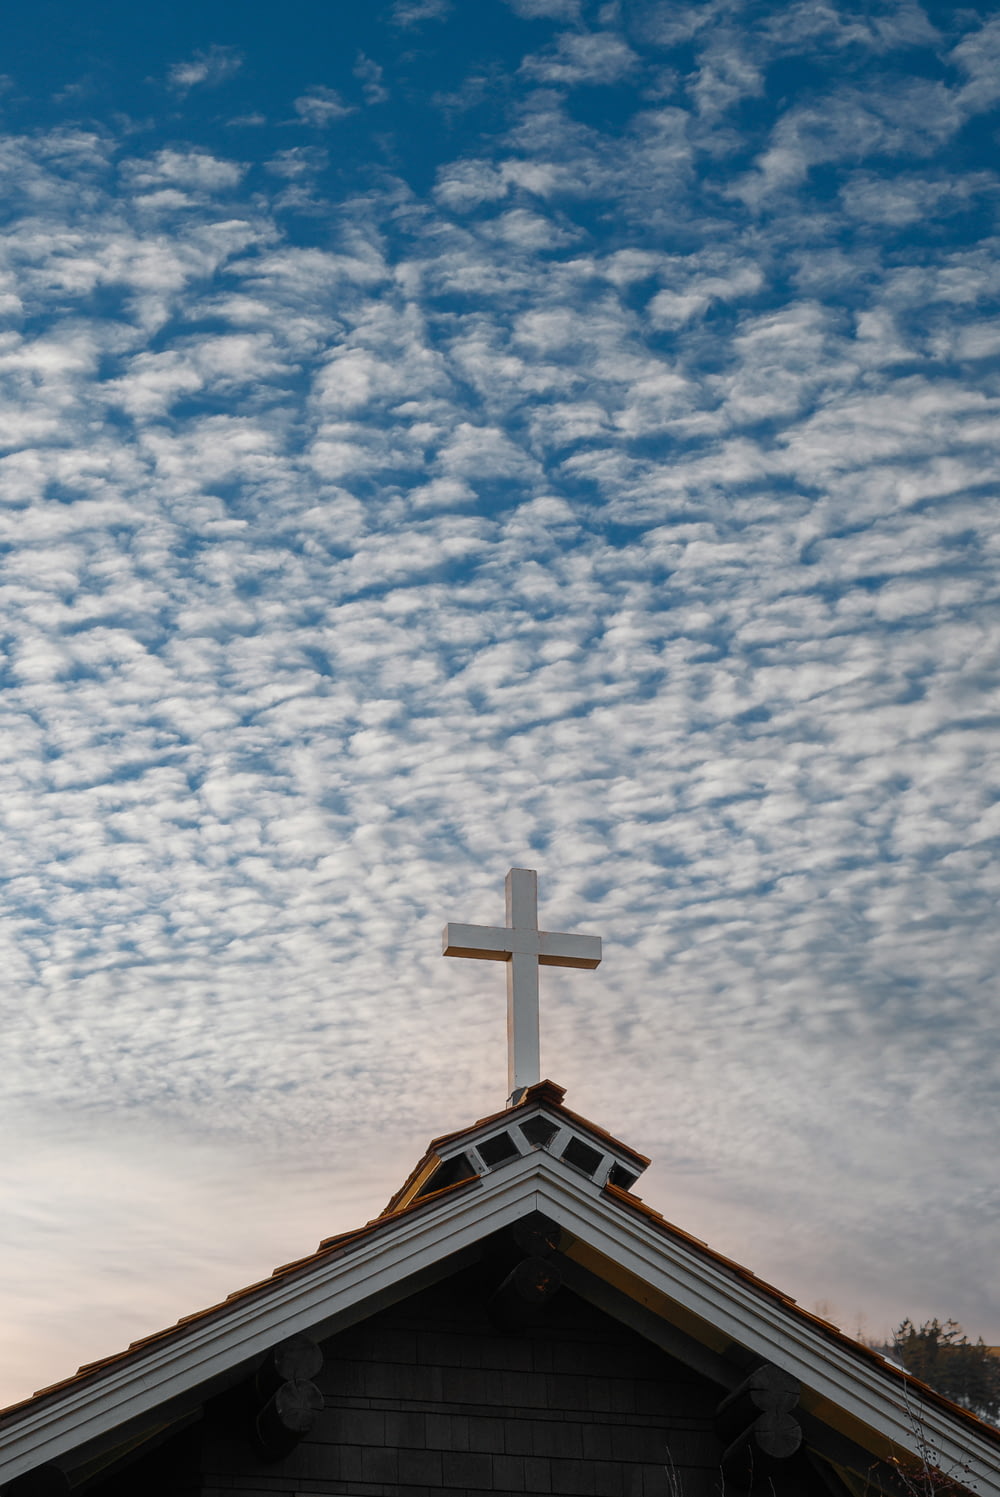 brown and white church under blue sky and white clouds during daytime